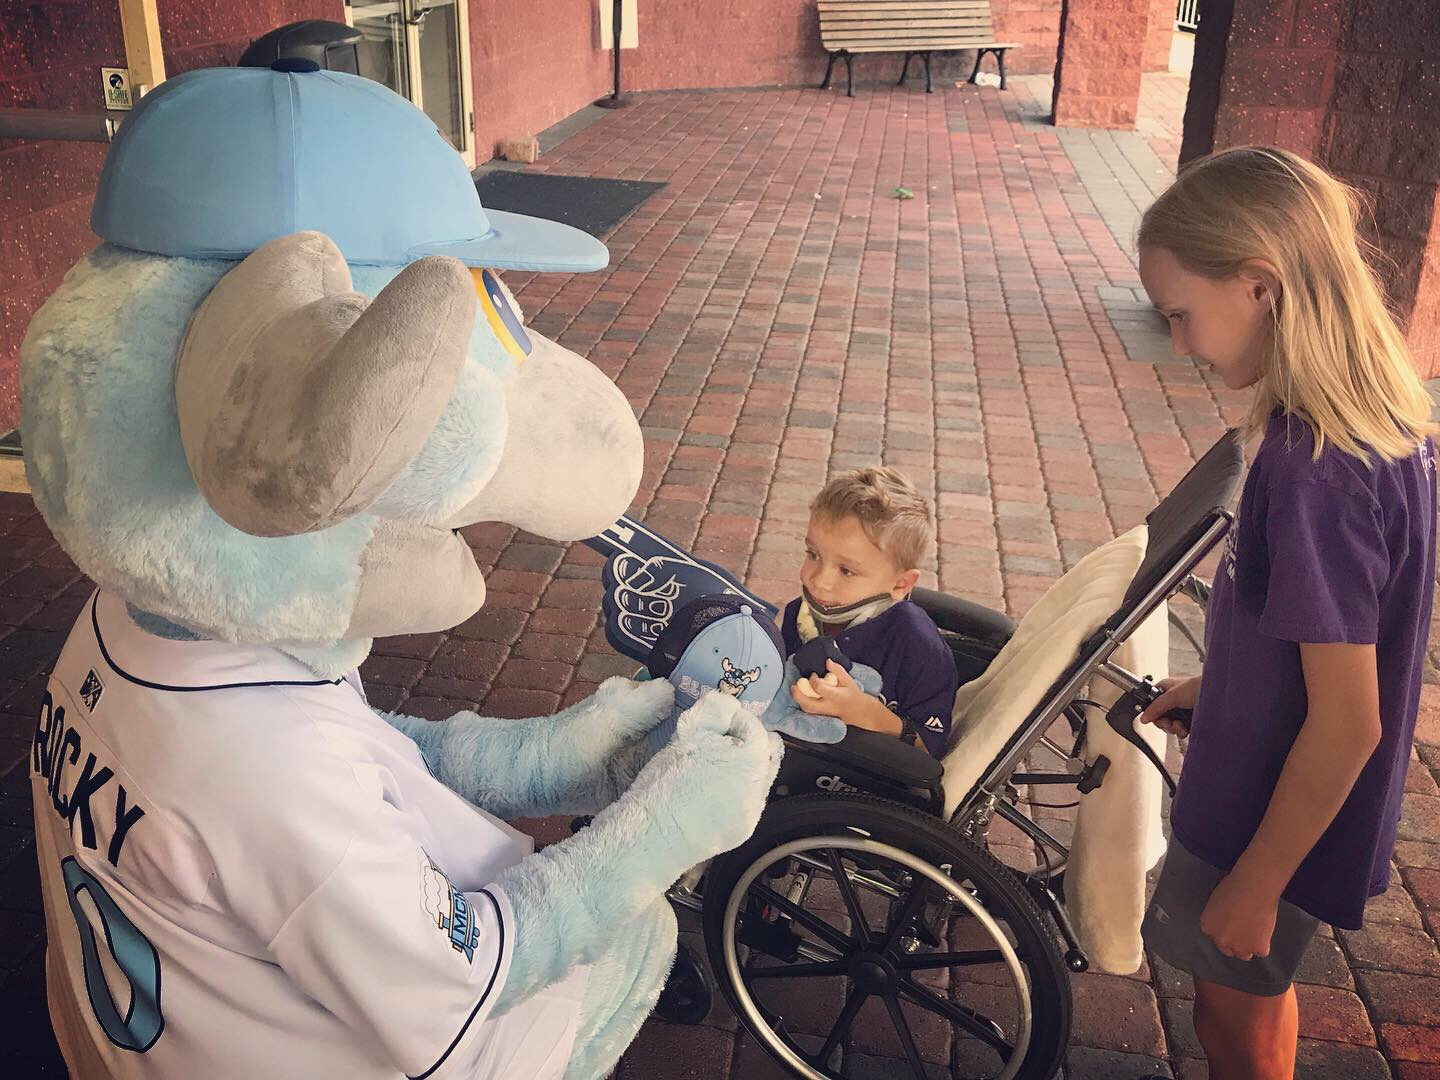 Autographs from Rocky Bluewinkle, the mascot